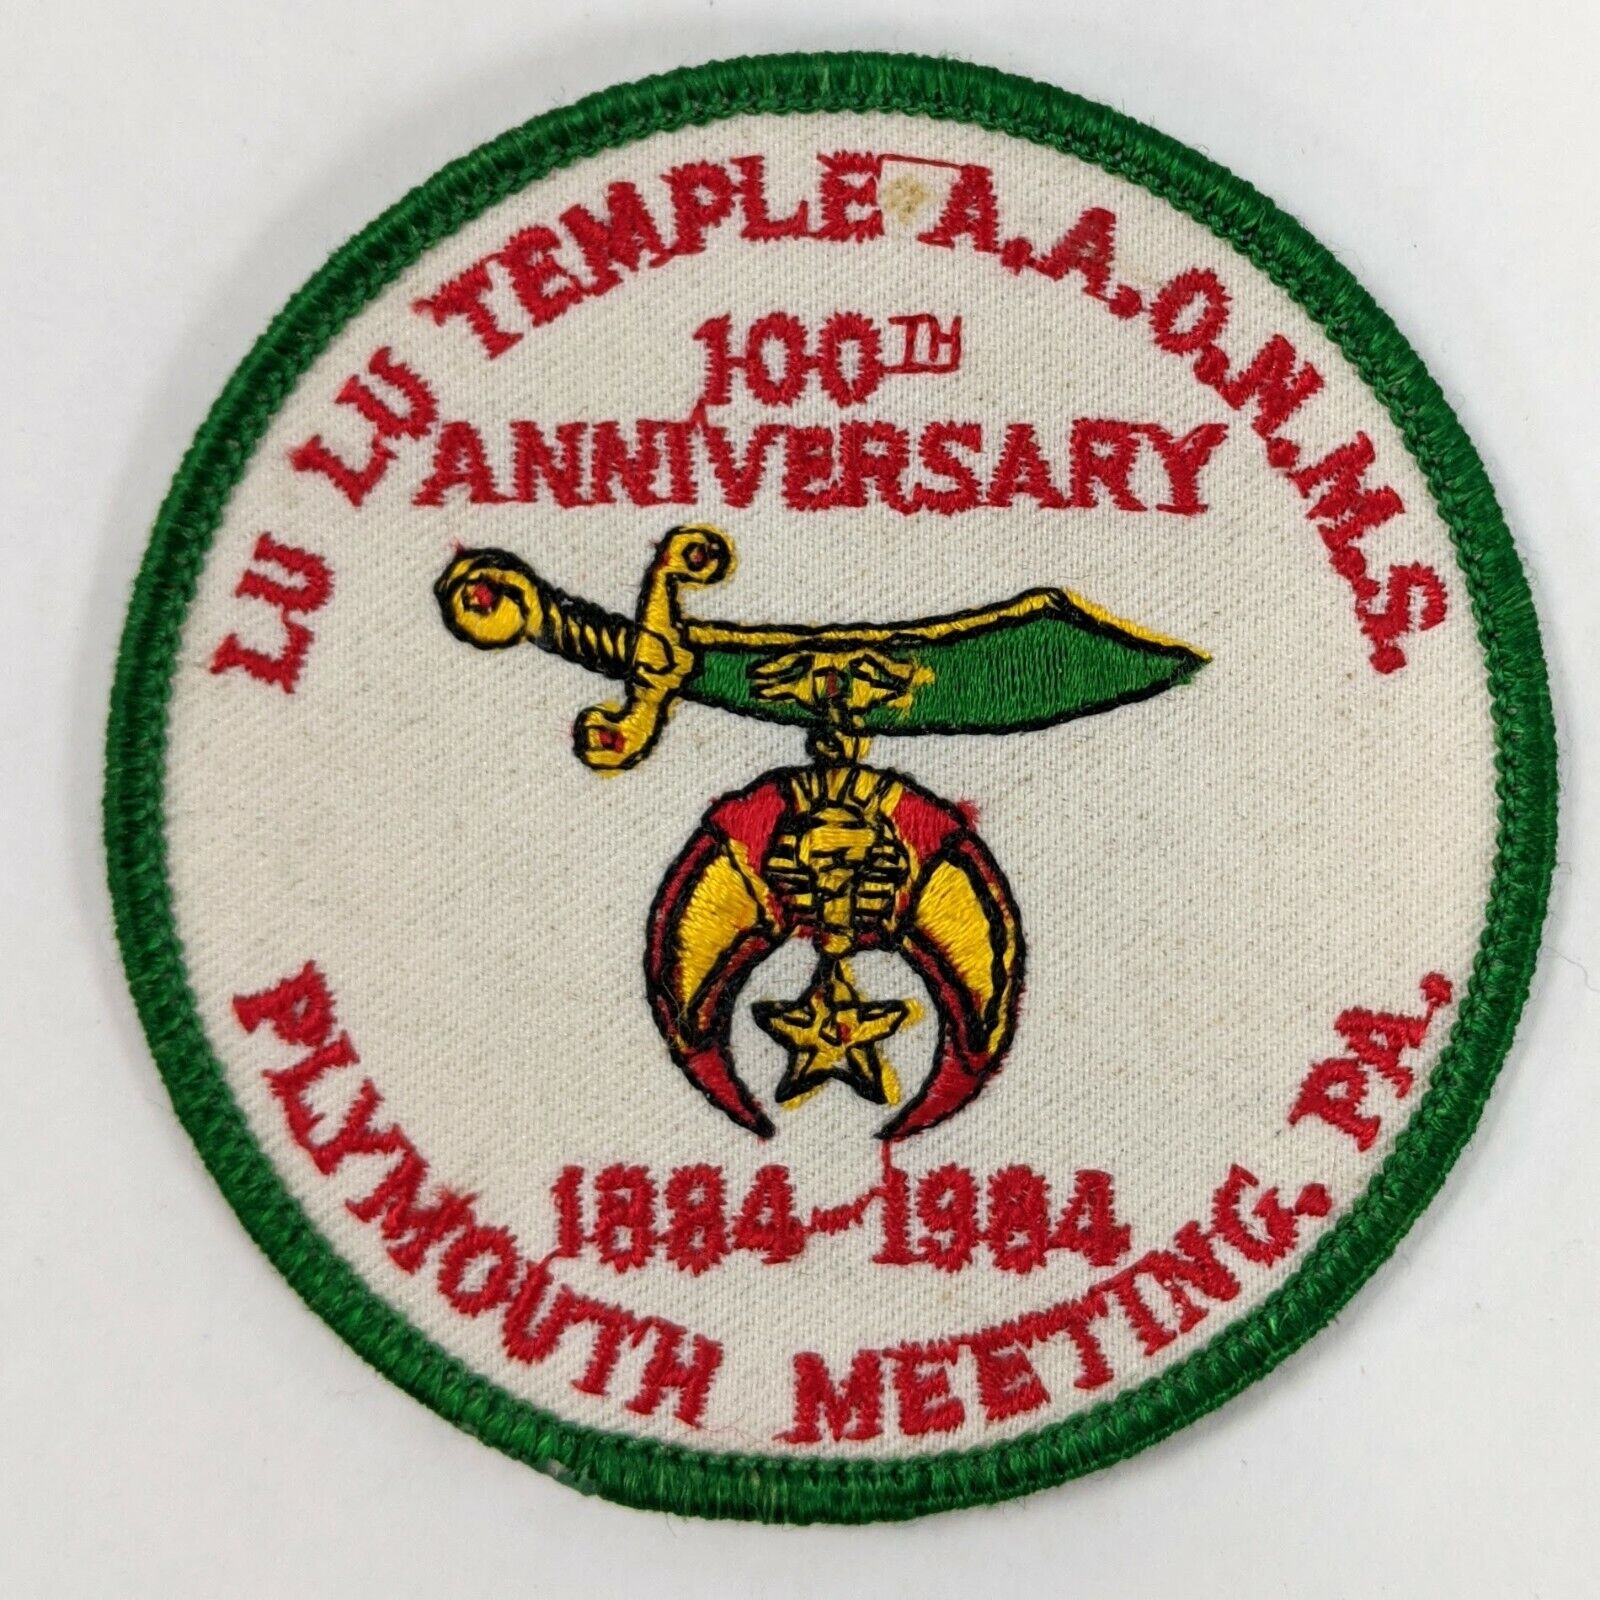 AAONMS Lu Lu Temple Shriners Free Mason Plymouth Meeting 1984 Embroidered Patch